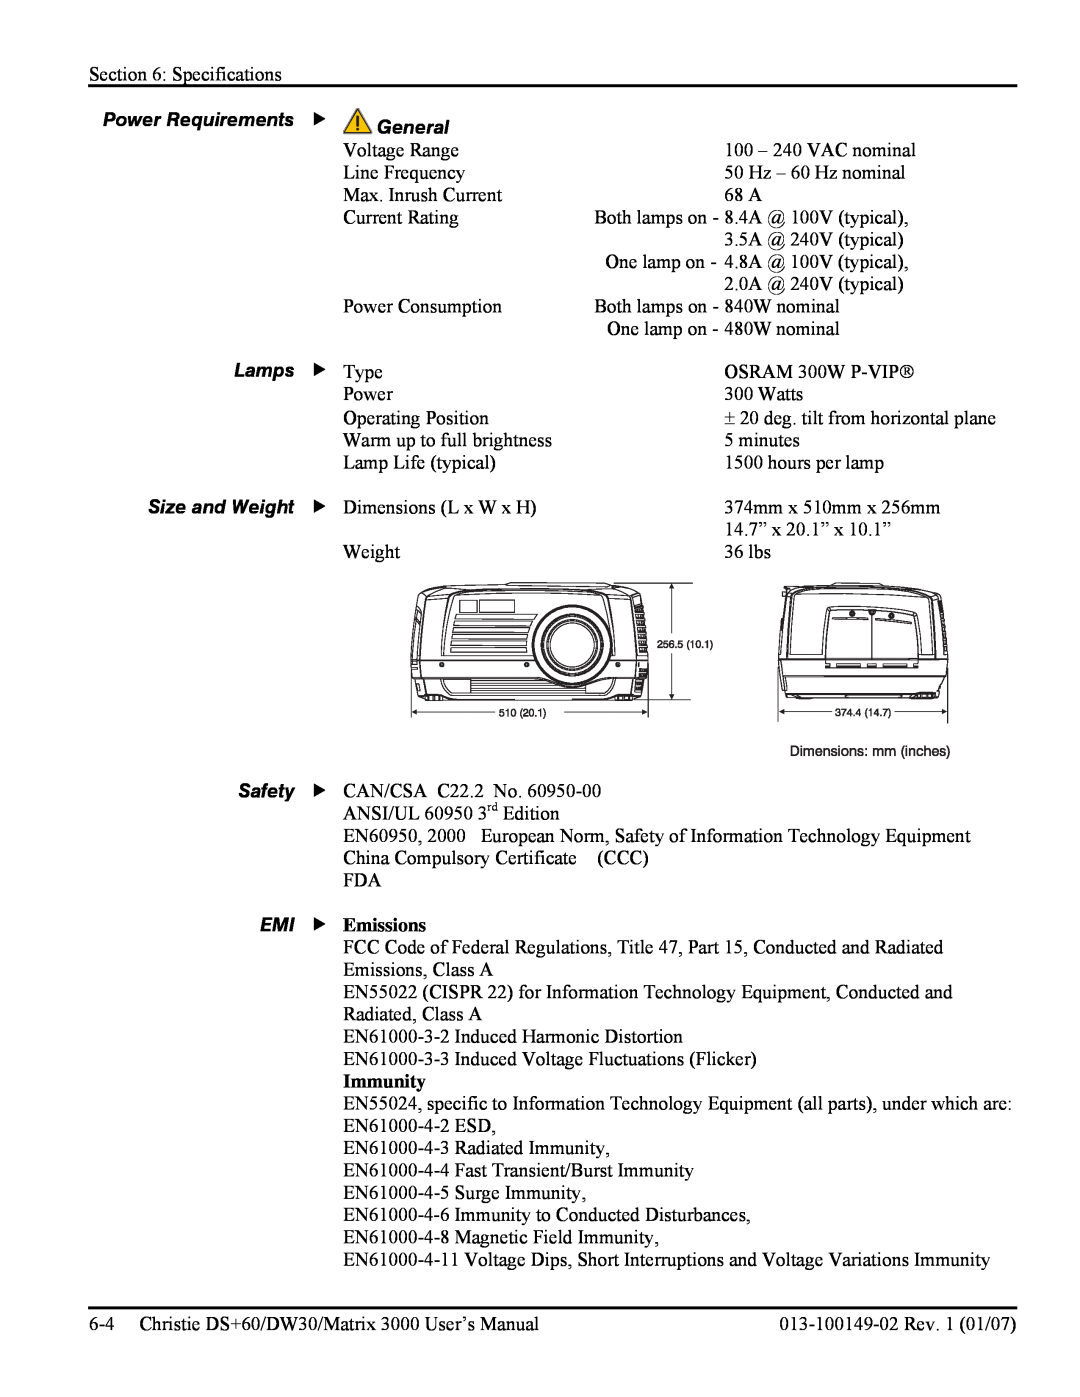 Texas Instruments DW30, MATRIX 3000 user manual General, Lamps f Type, Size and Weight, EMI f Emissions, Immunity 